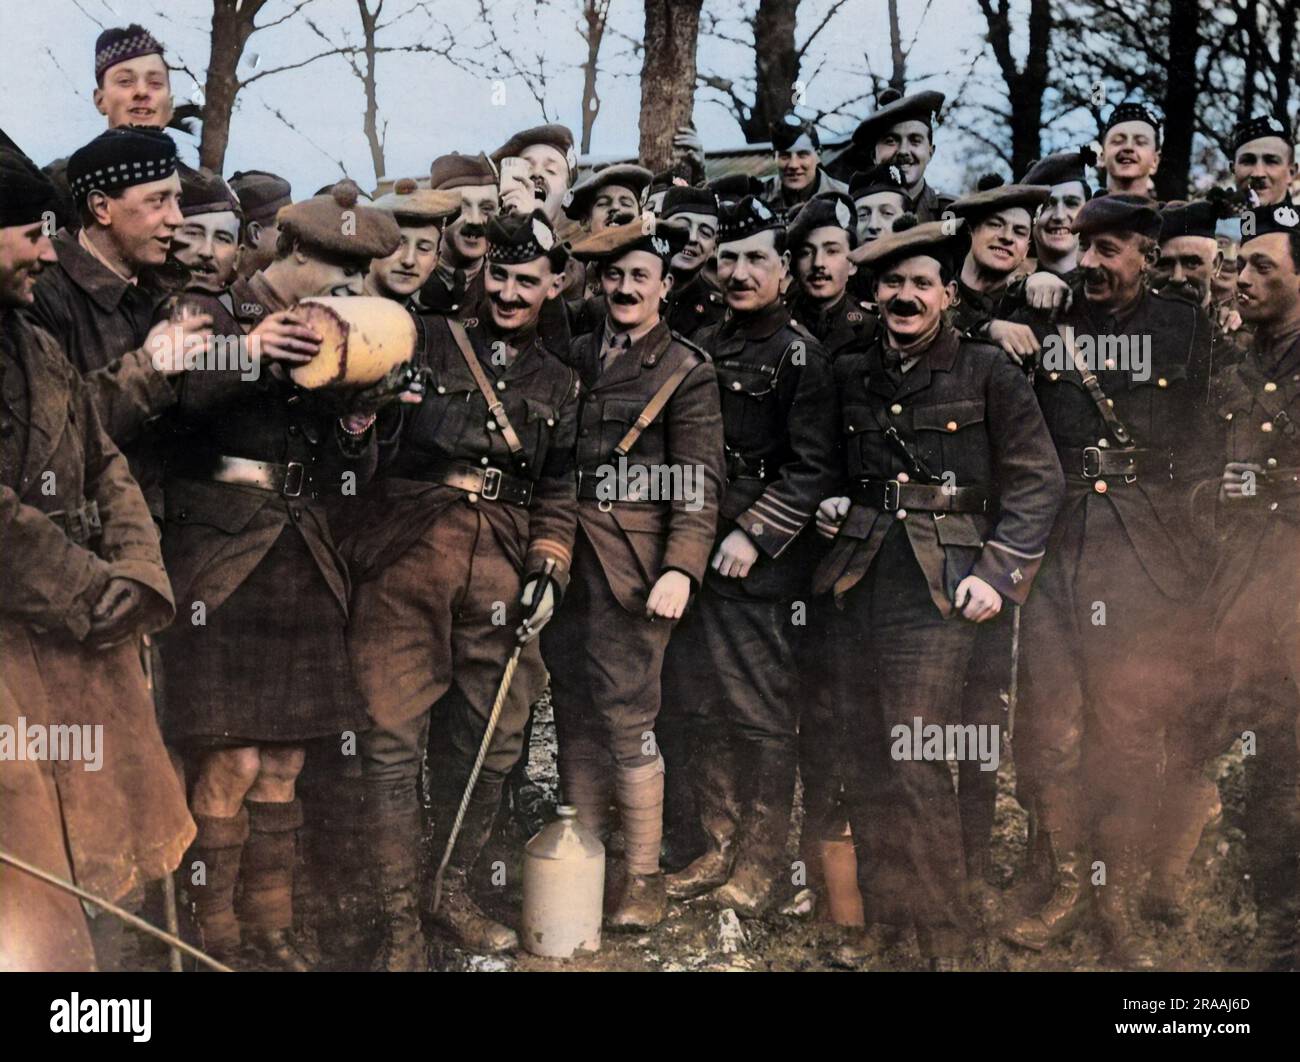 A group of Scottish army officers on New Year's Day on the Western Front during World War One.     Date: circa 1916 Stock Photo